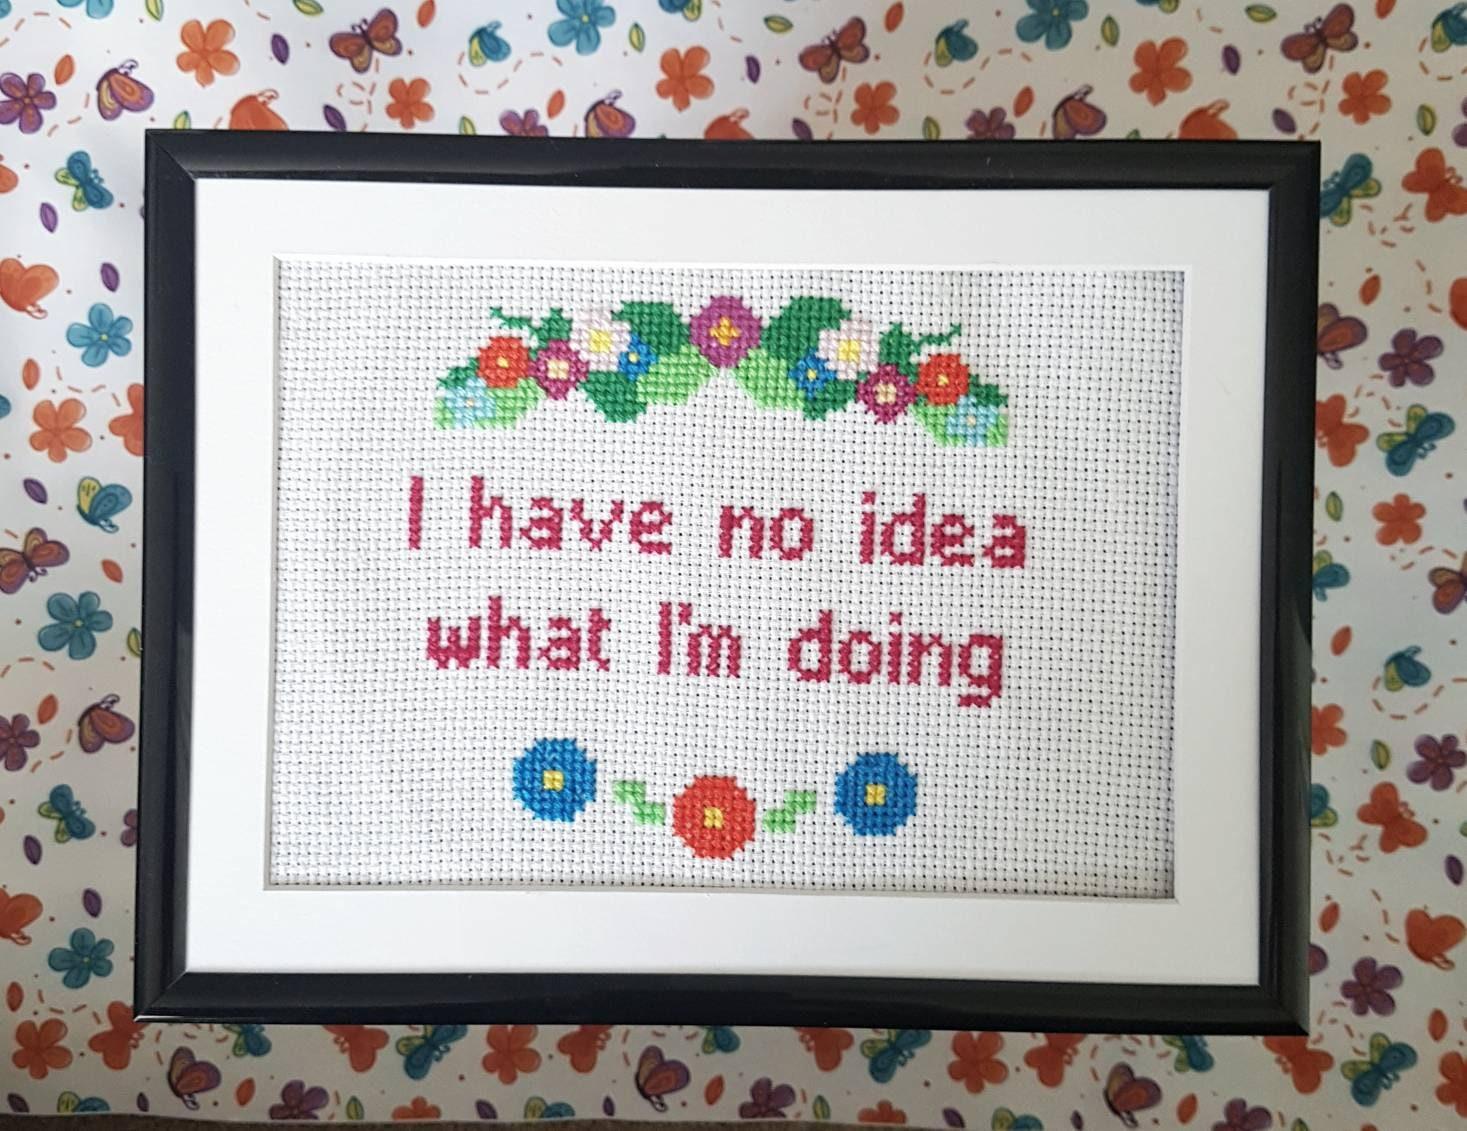 Completed cross stitch from Thistleflat Crafts with the words 'I have no idea what I'm doing' in a floral border. Comes in a black frame with mount